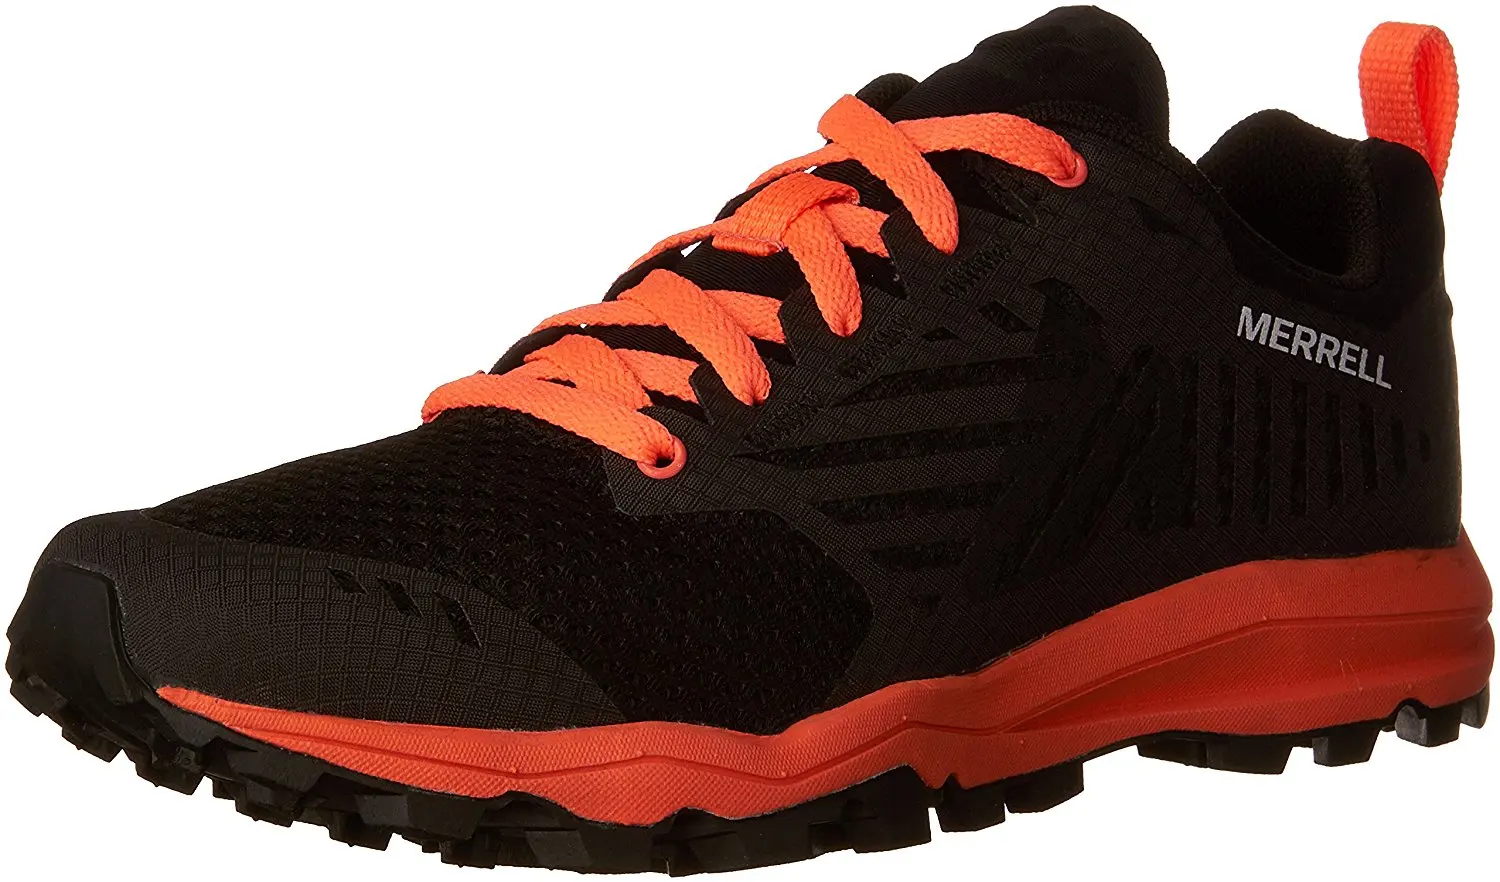 cheapest place to buy merrell shoes